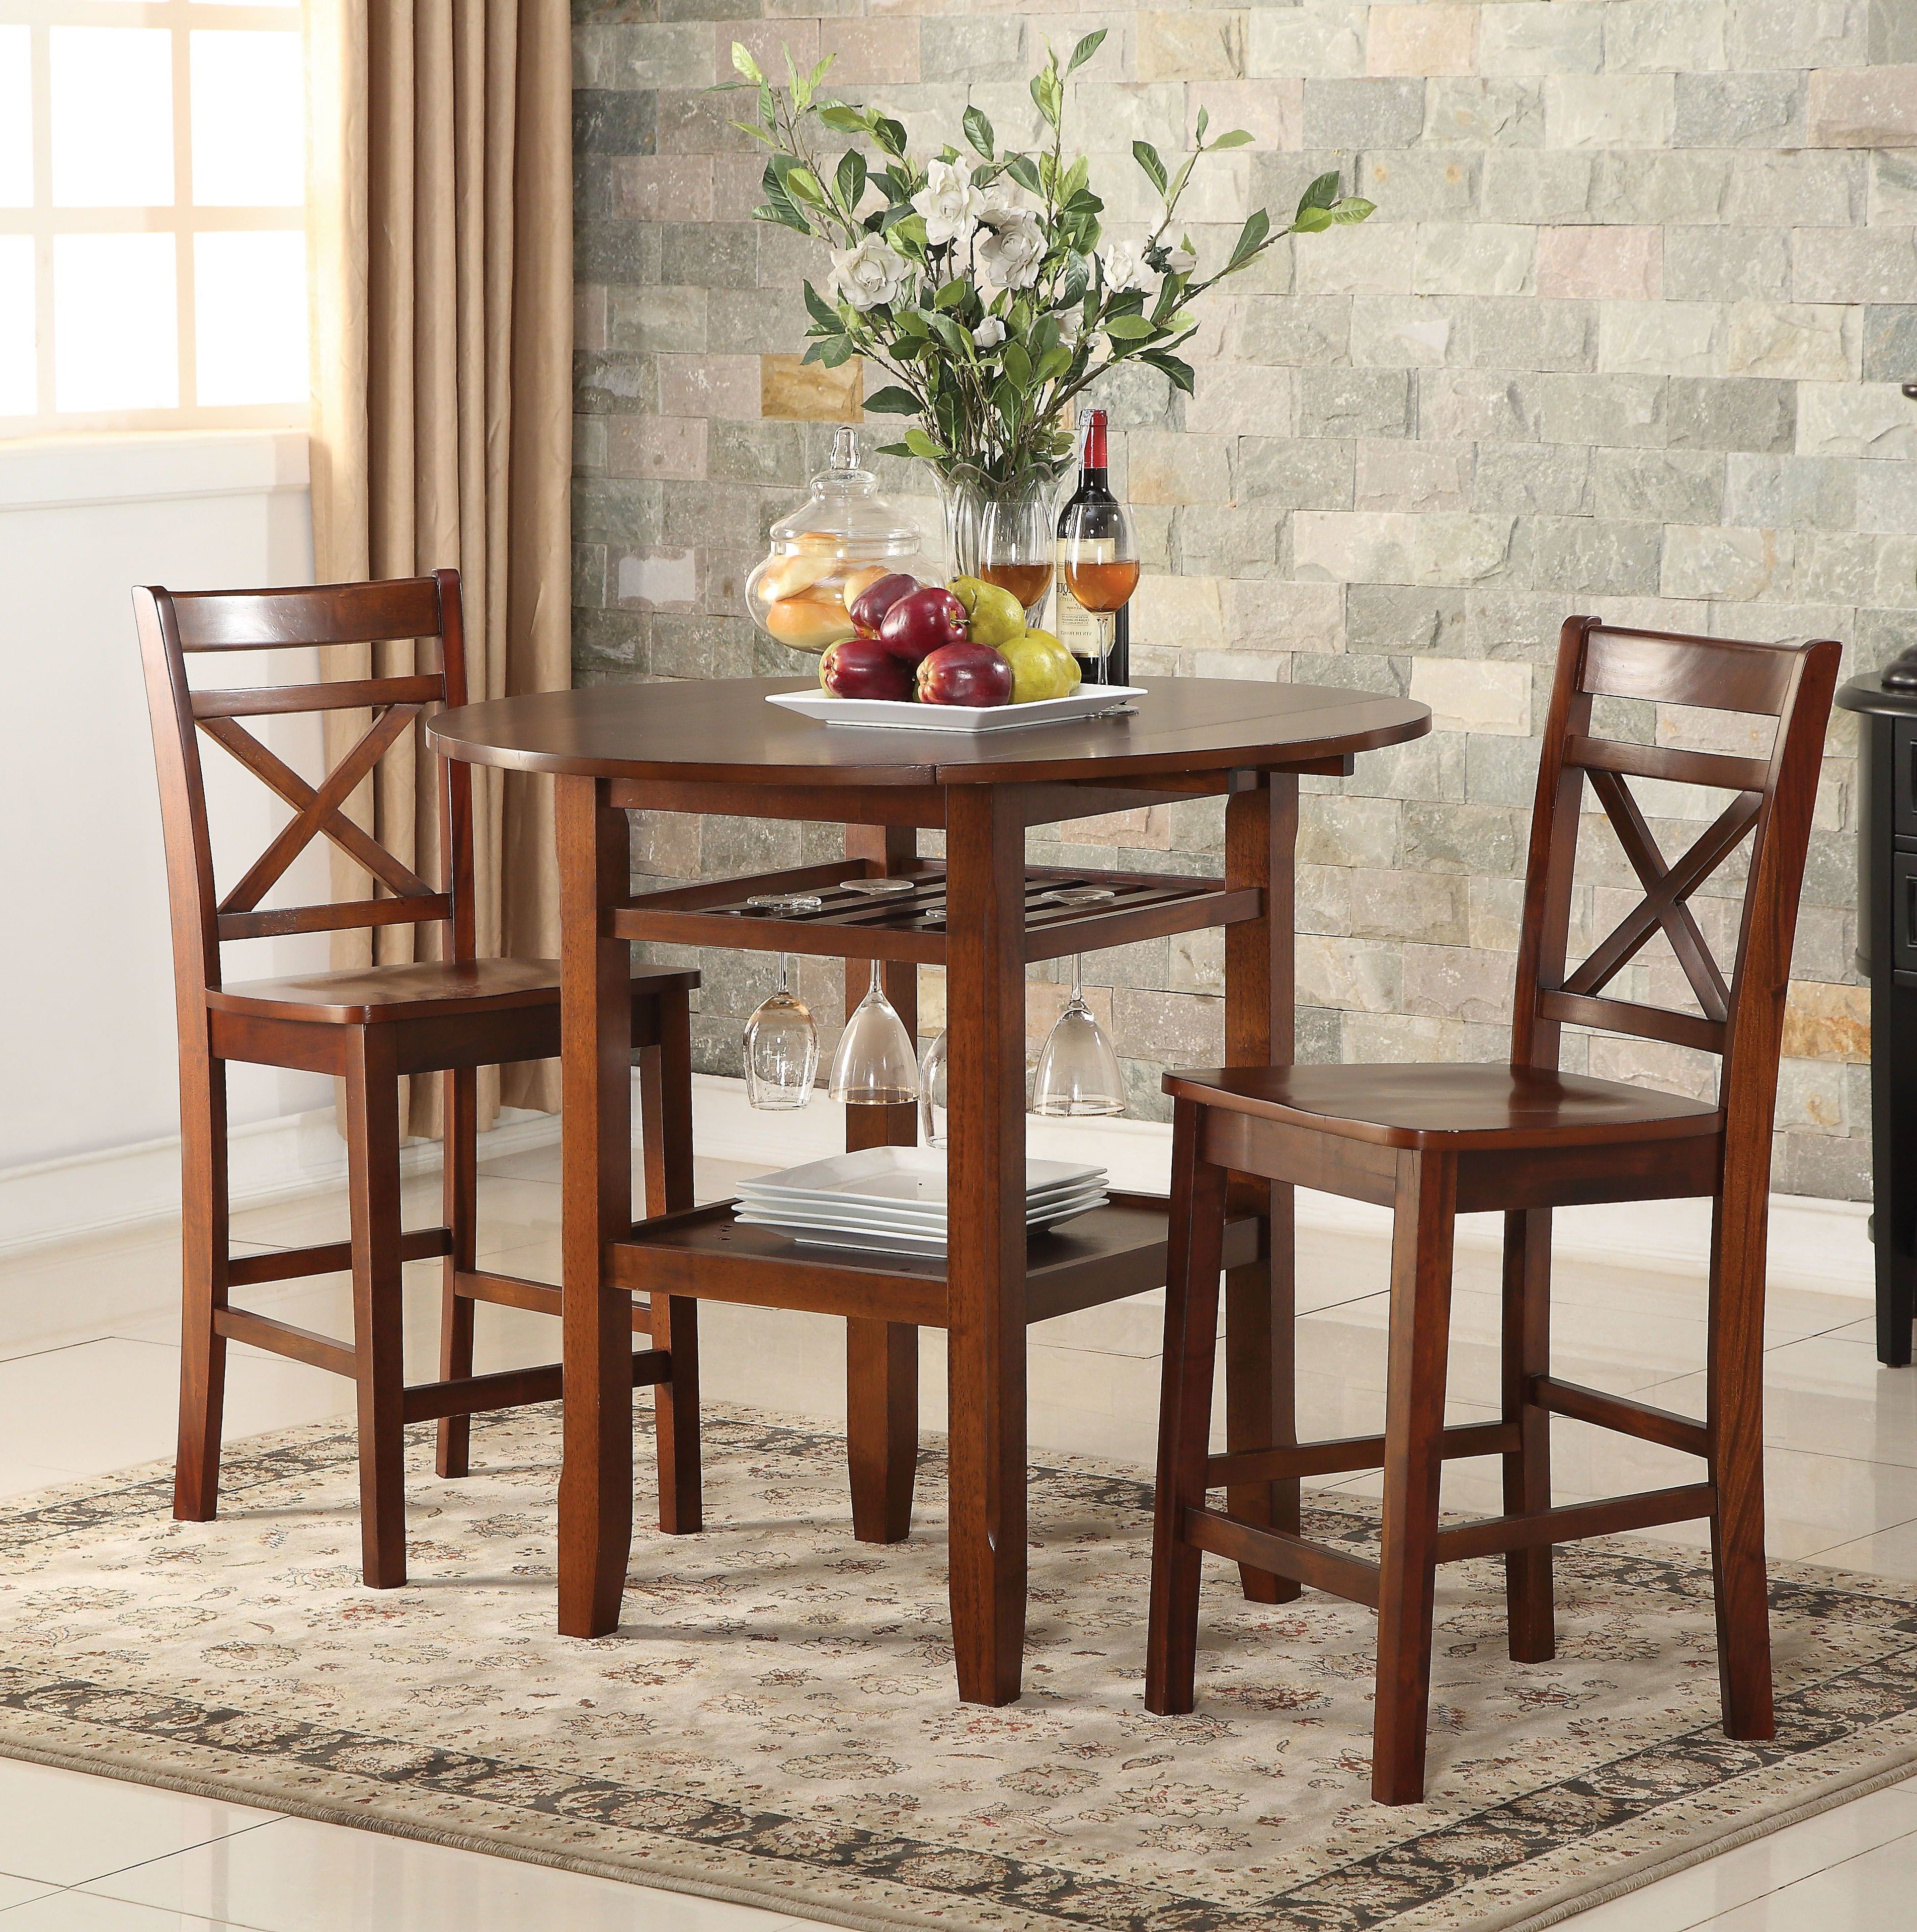 Most Recent August Grove Talbot 3 Piece Counter Height Drop Leaf Dining Table Within Bettencourt 3 Piece Counter Height Dining Sets (View 16 of 25)